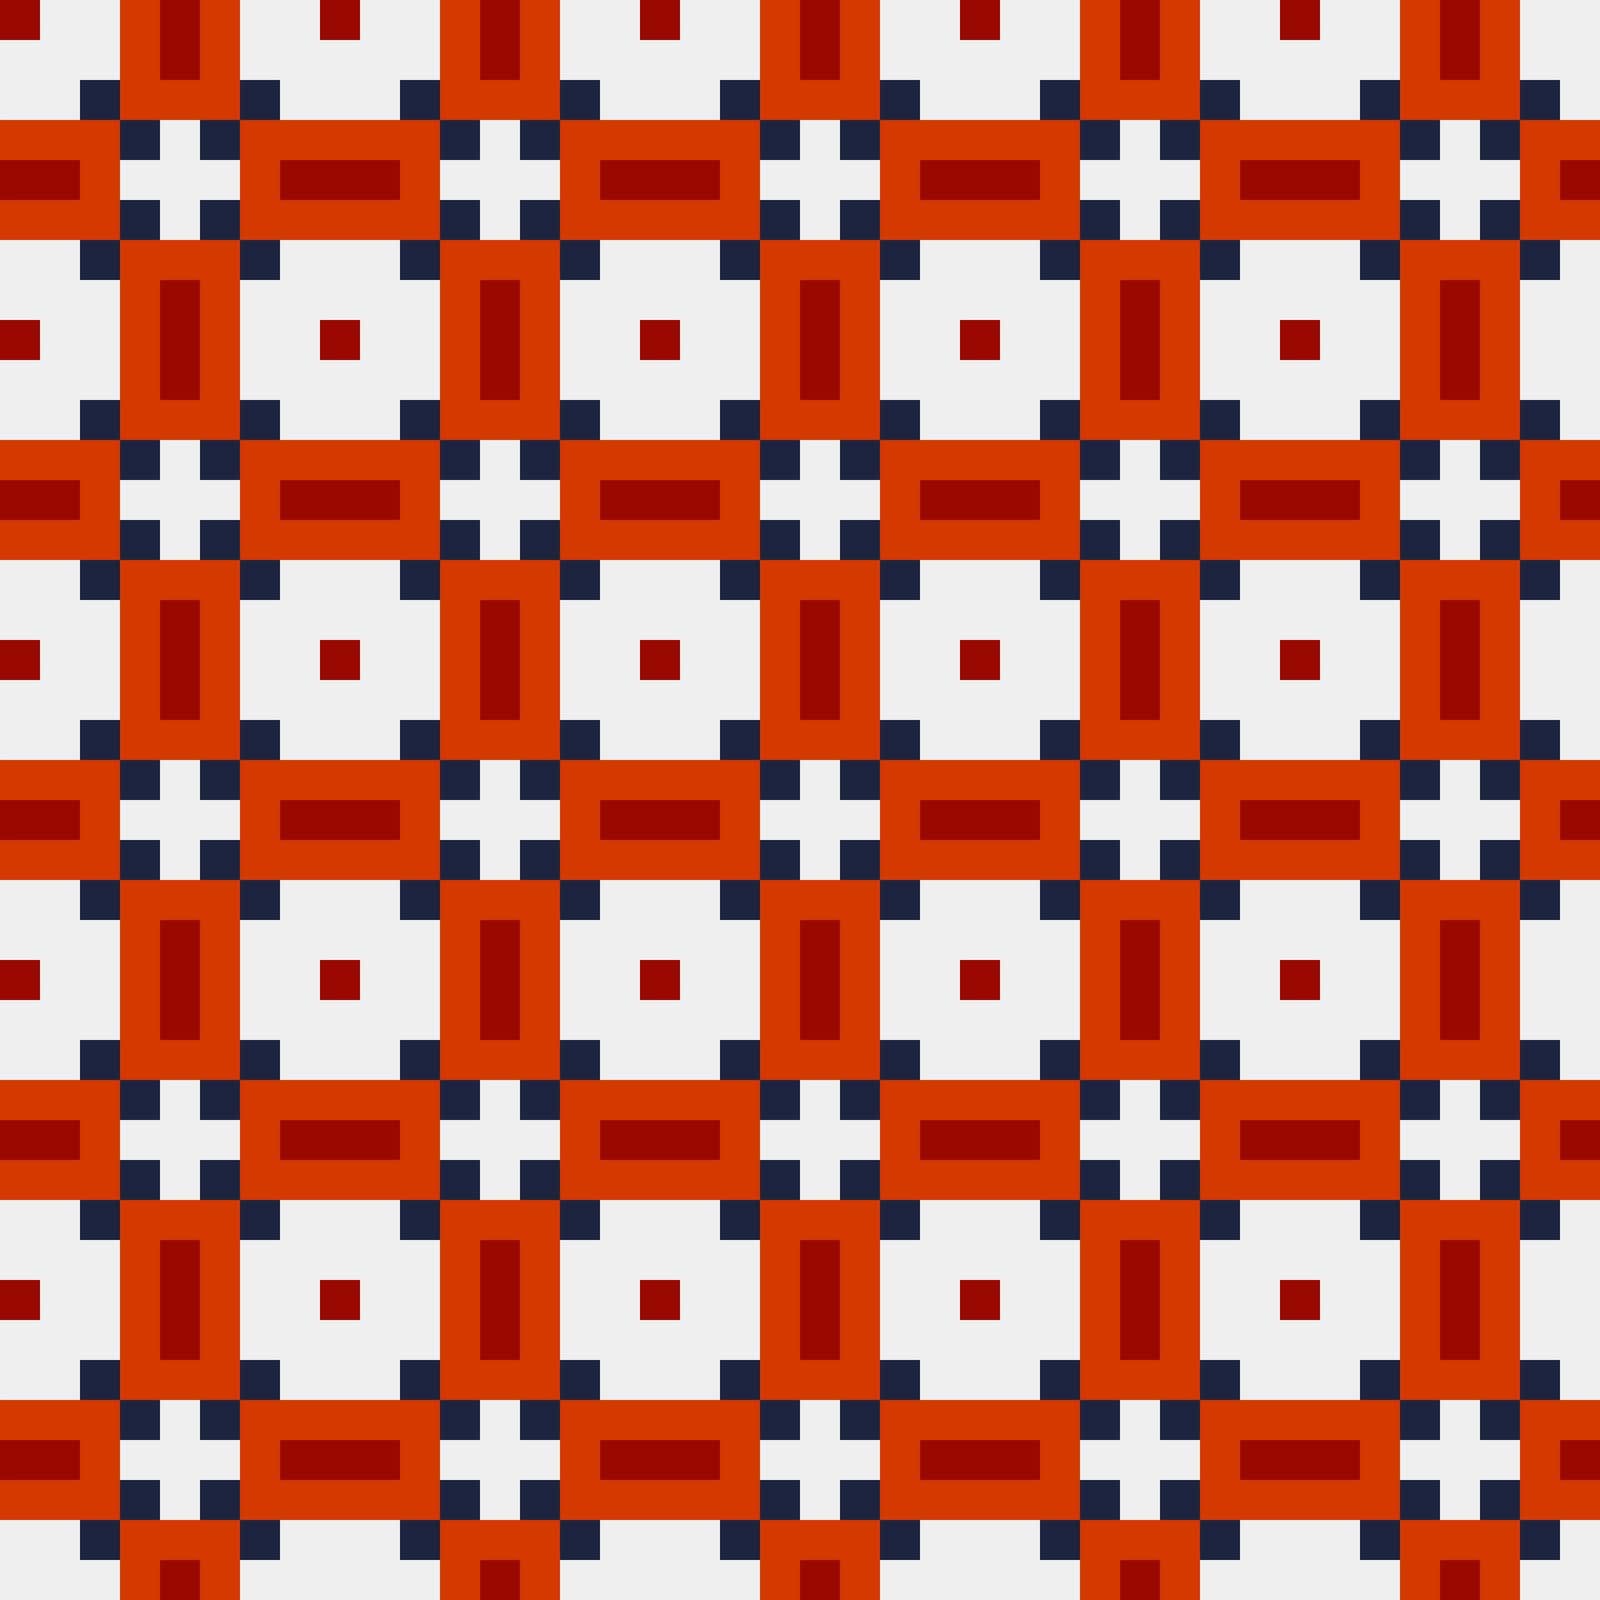 Abstract Cross-Pattern Dotted generative computational art illustration by aslyva